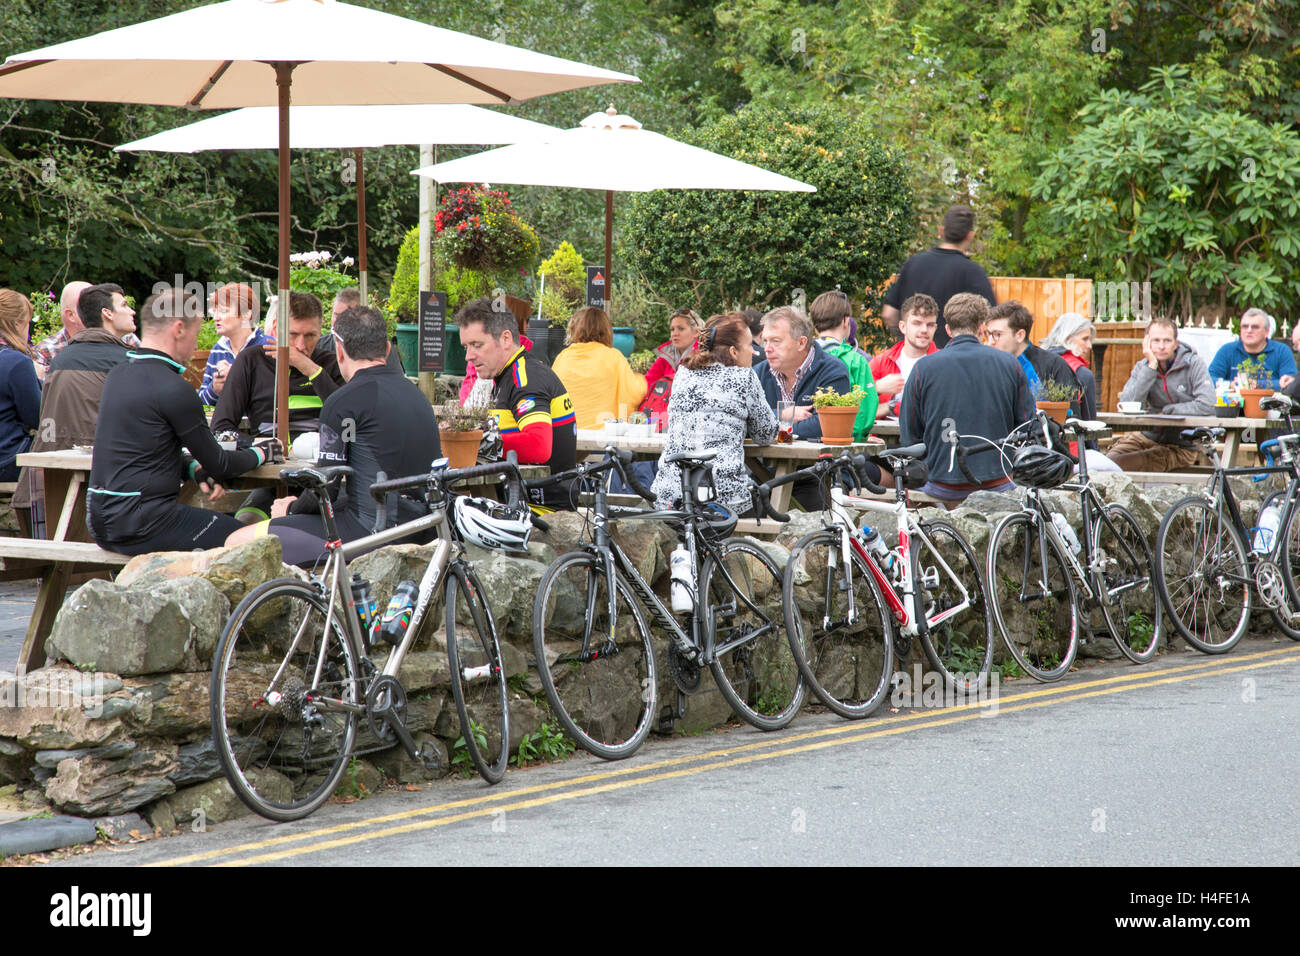 Cyclists at a cafe in the attractive village of Beddgelert, Snowdonia National Park, North Wales, UK Stock Photo